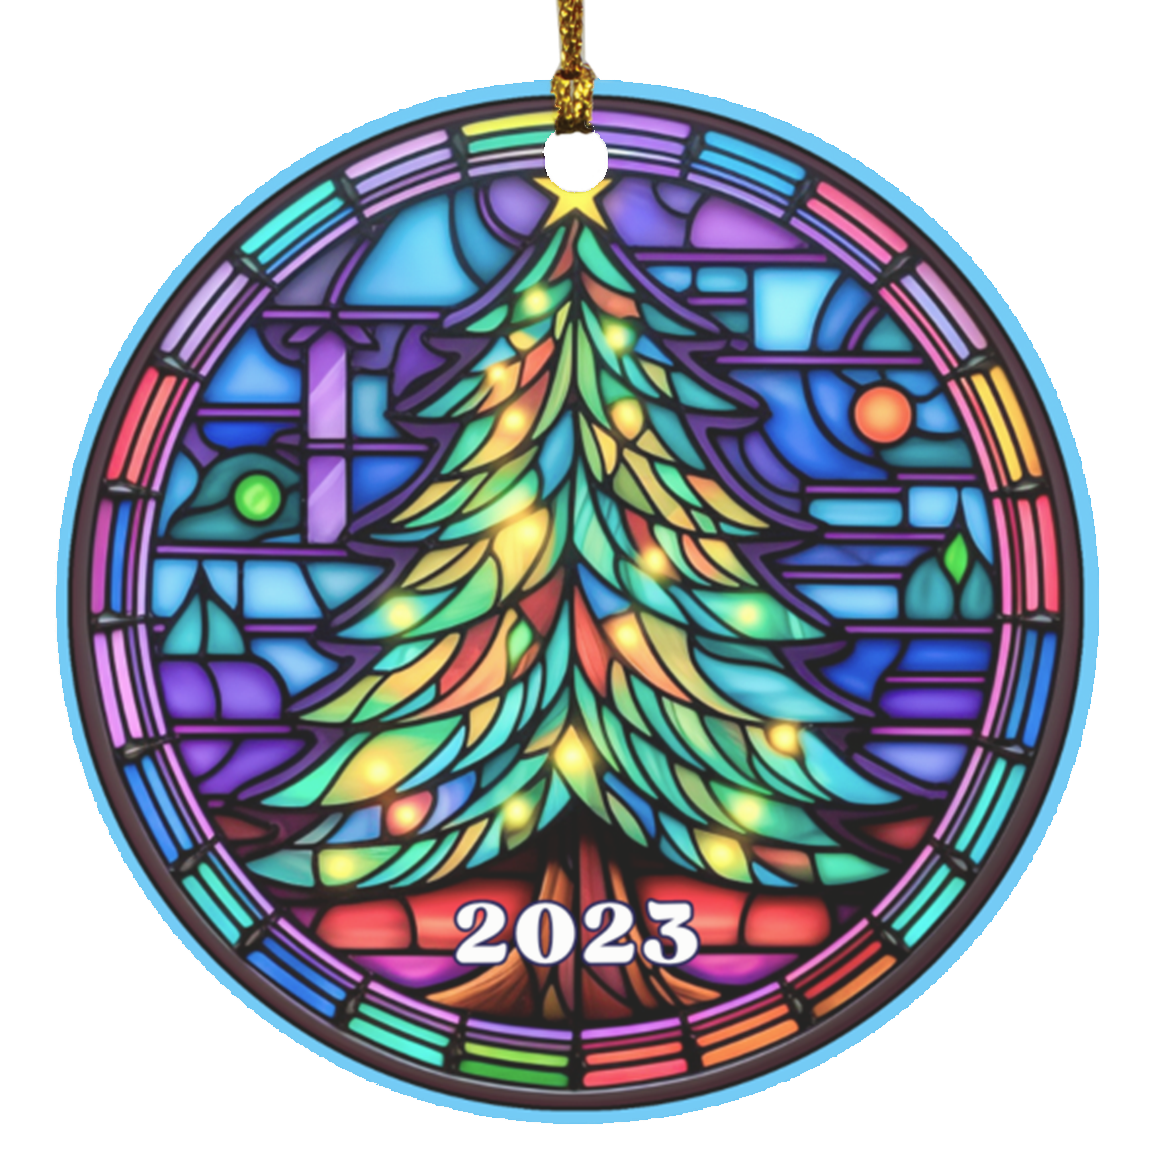 Stained Glass Style Christmas Tree Year Ornament